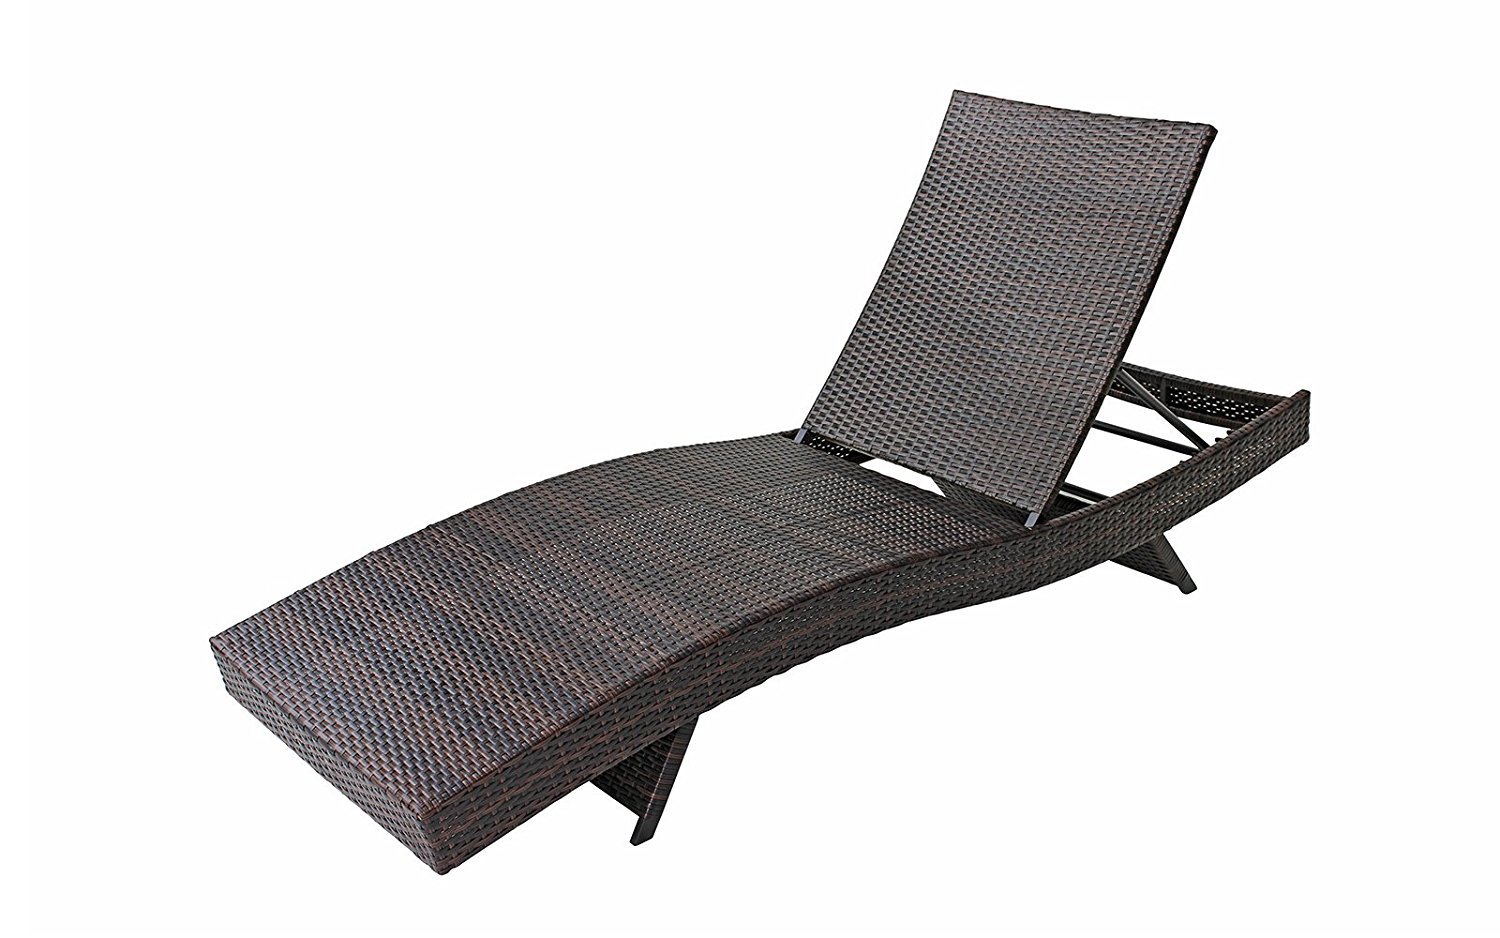 2 Pcs All Weather Modern Garden Outdoor Patio Chaise Lounge Chairs